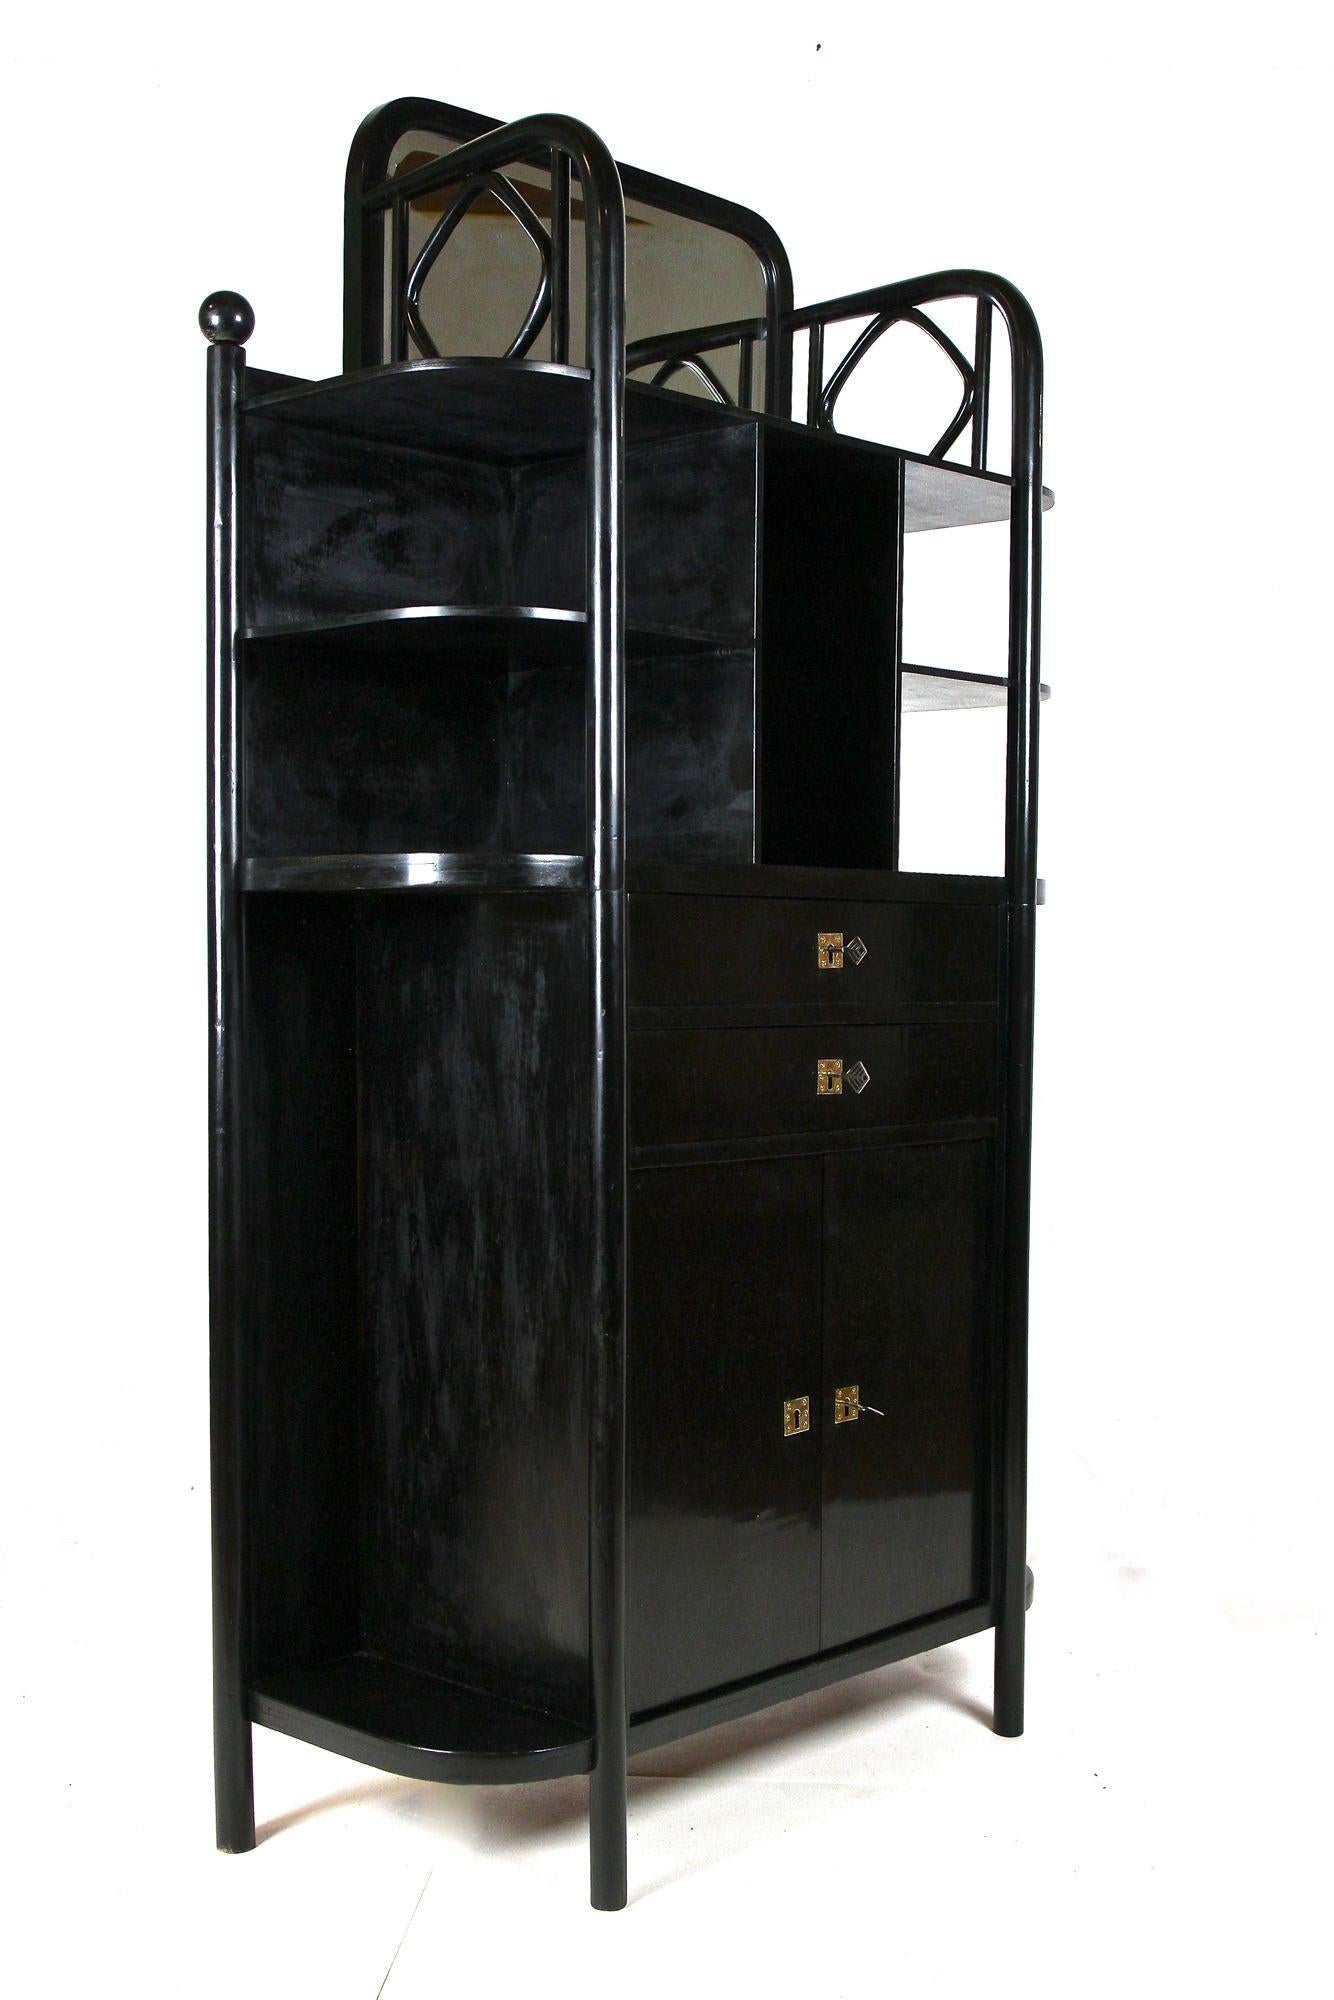 Black Art Nouveau Display Cabinet by Josef Hoffmann for Thonet, AT ca. 1905 For Sale 12